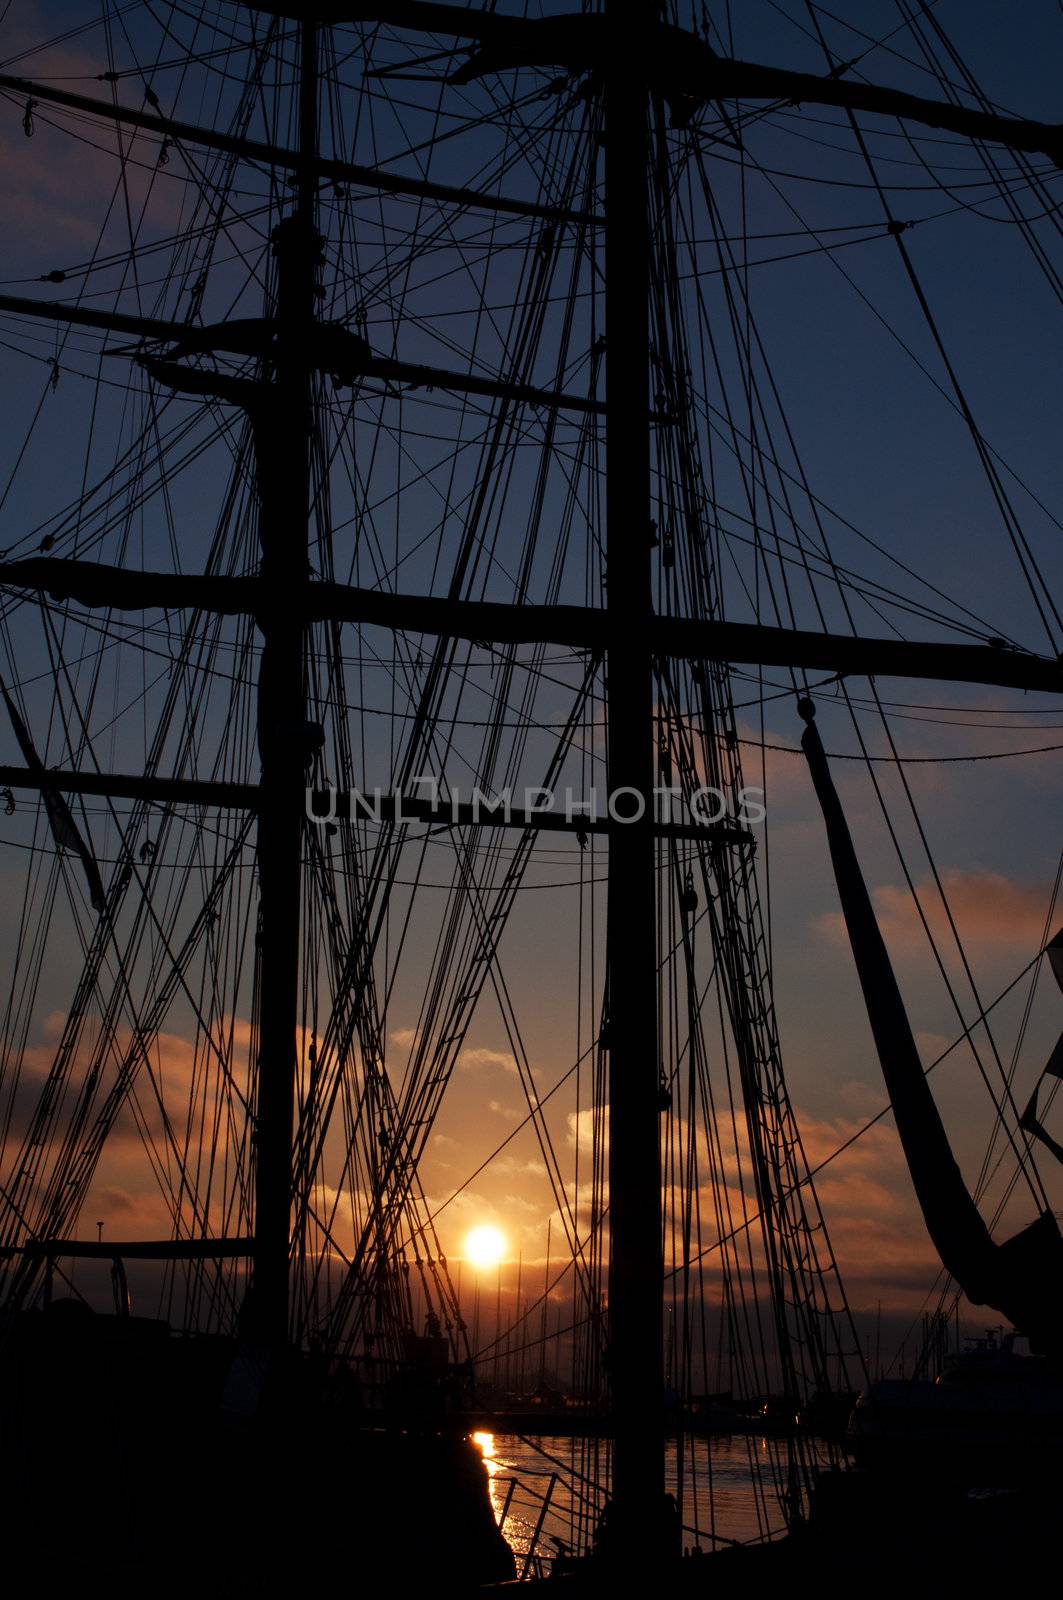 Tall ship silhouette at sunset at Oslo Fjord